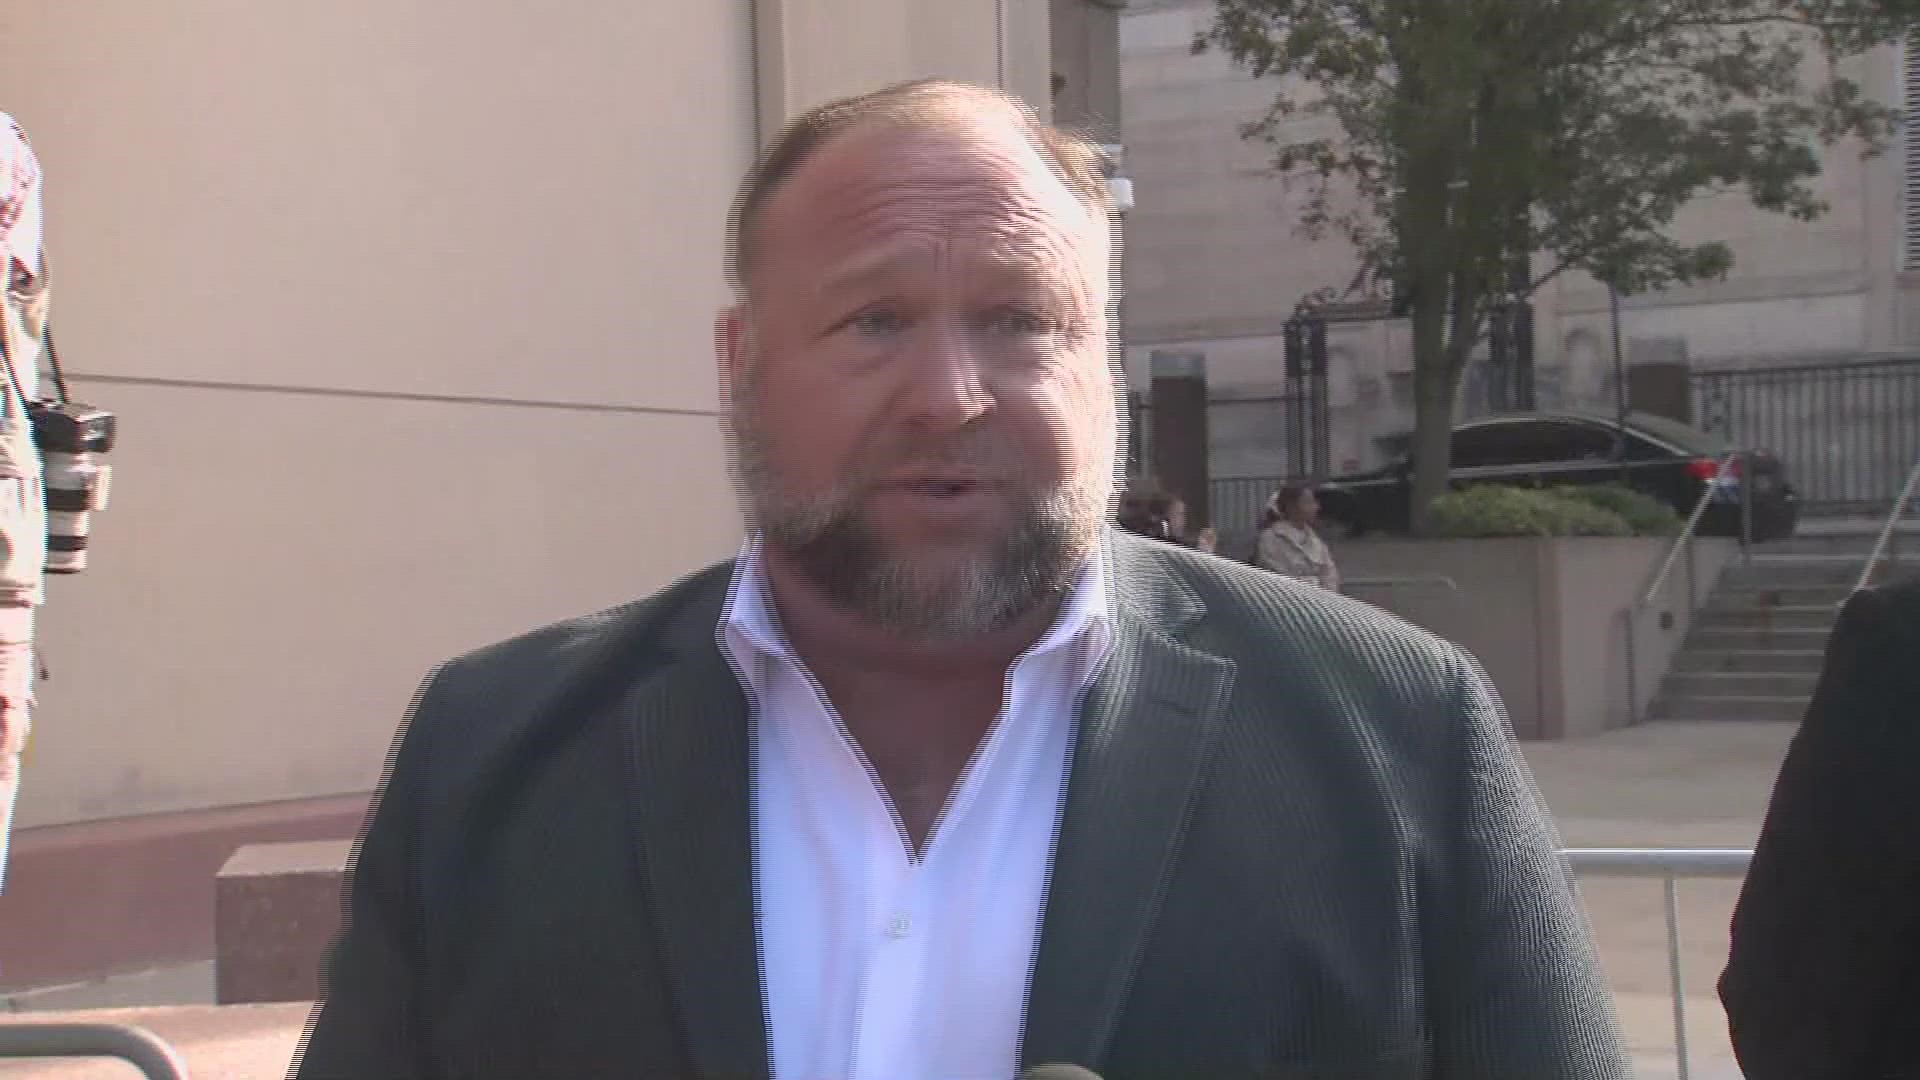 Alex Jones spoke to the media before walking into Waterbury Superior Court on Friday, as he is expected to continue testimony in his defamation trial.